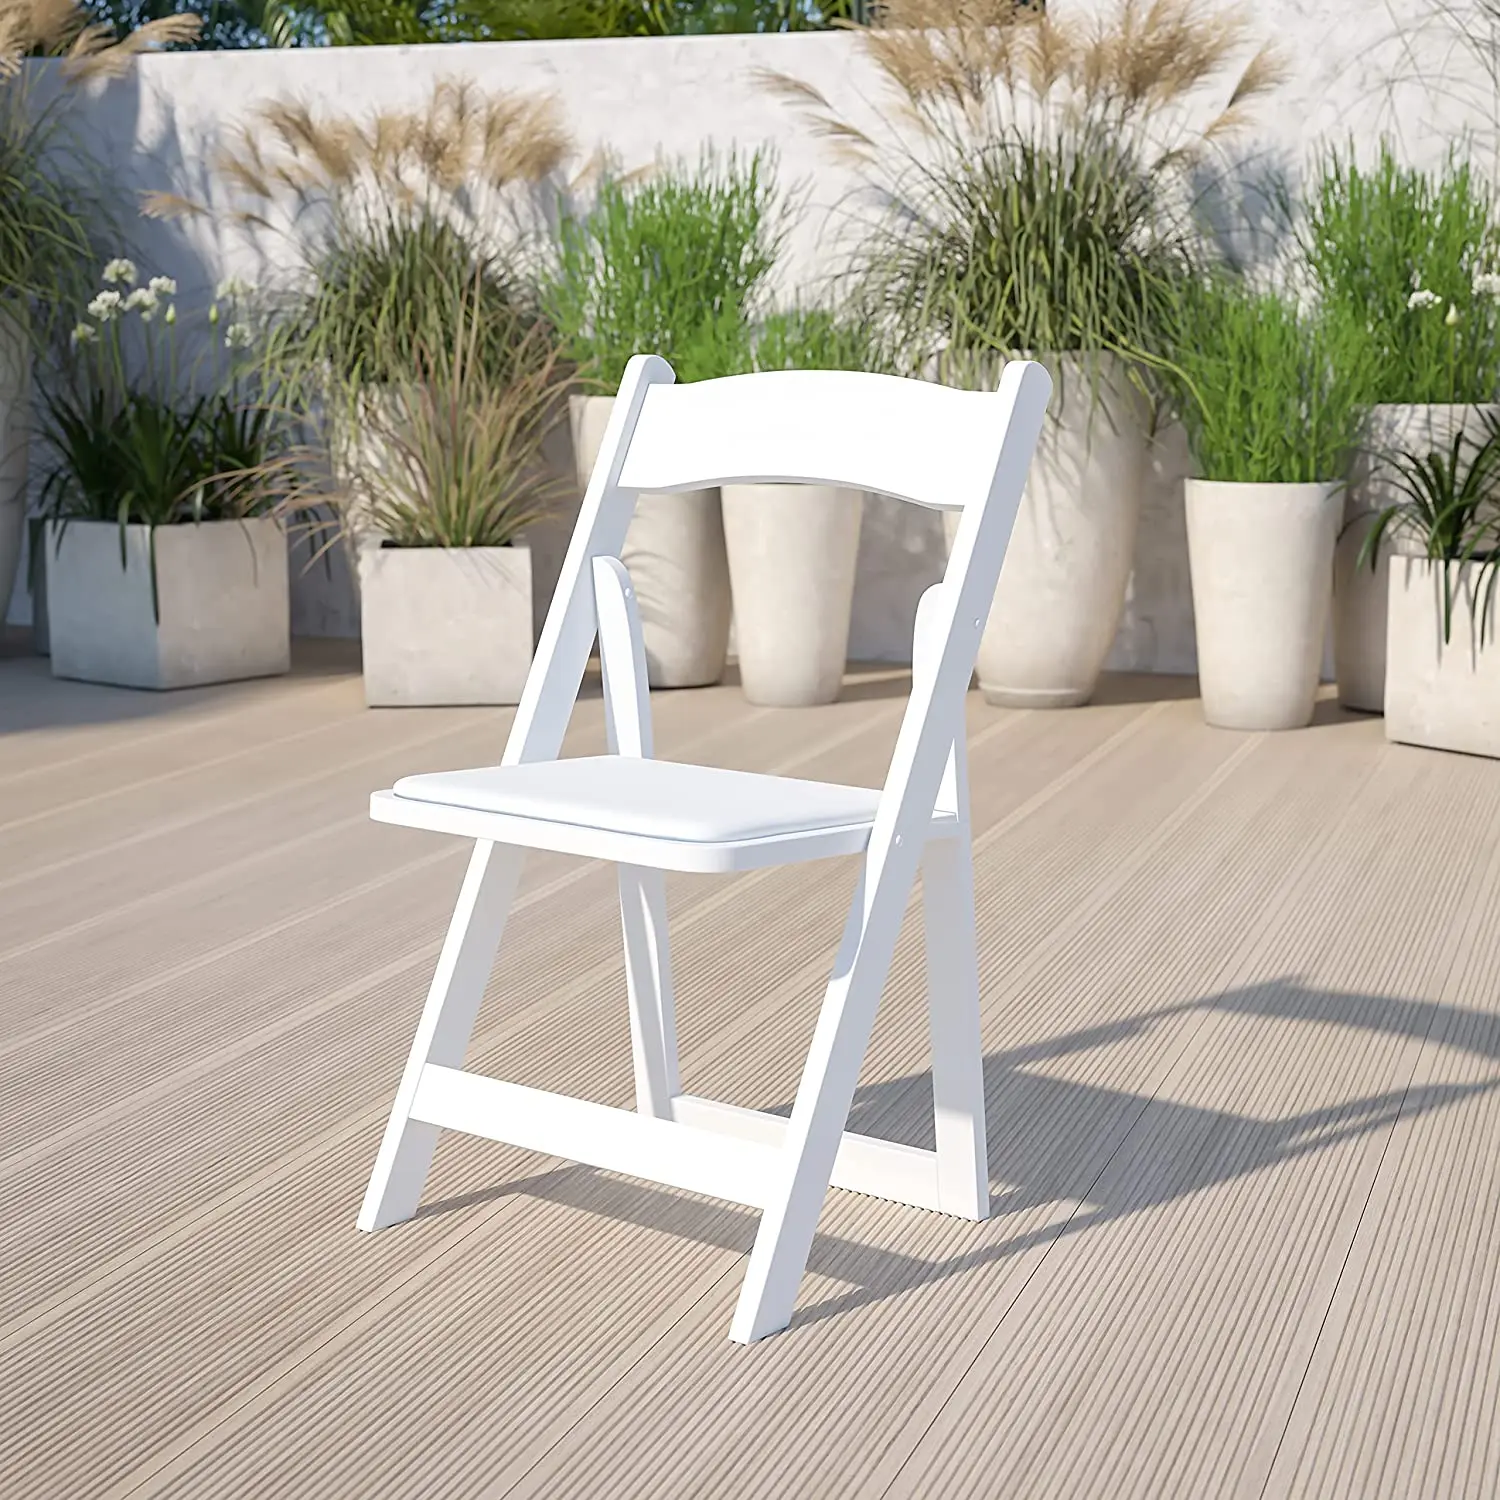 Whosale Stackable Outdoor Event Wedding White Resin Padded Folding Chair